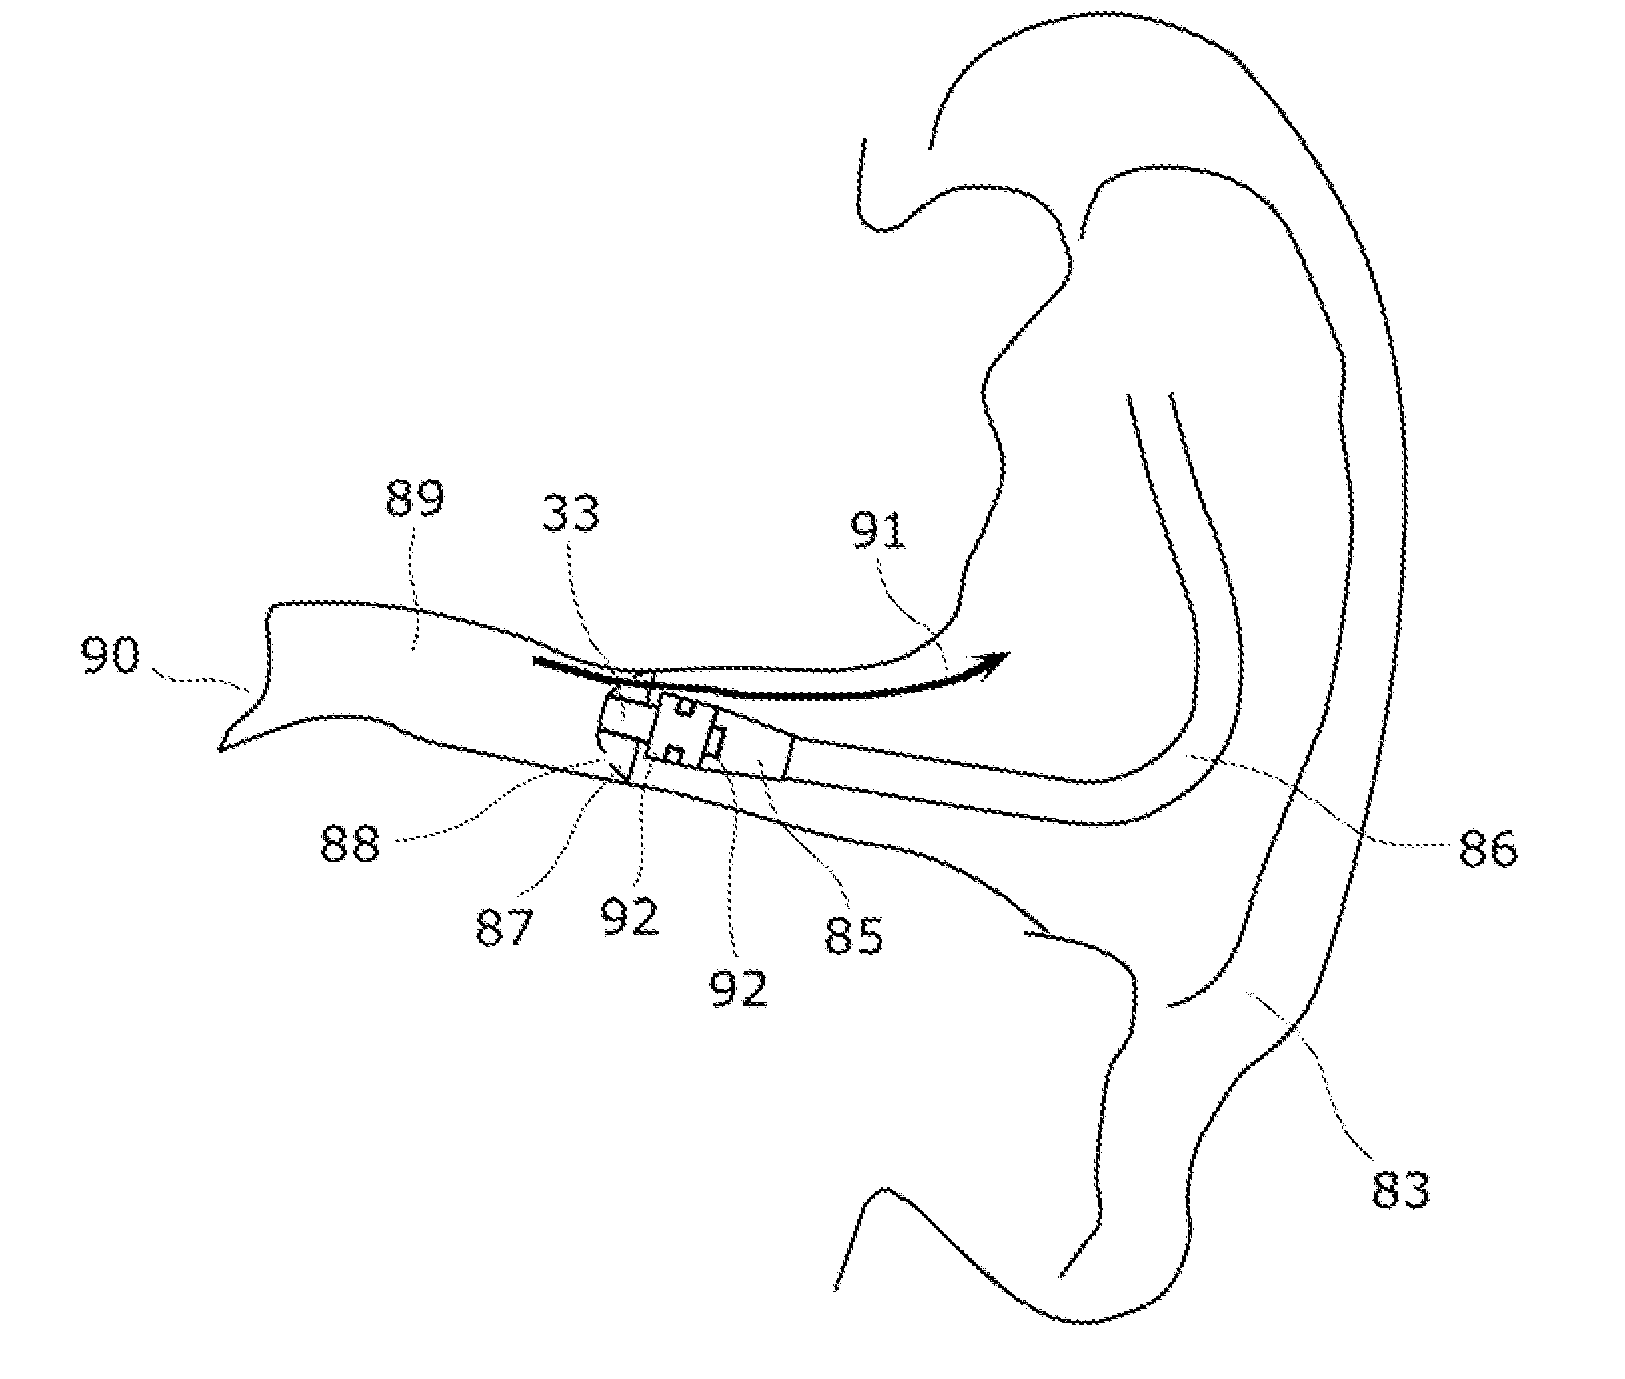 Speaker, hearing aid, earphone, and portable terminal device